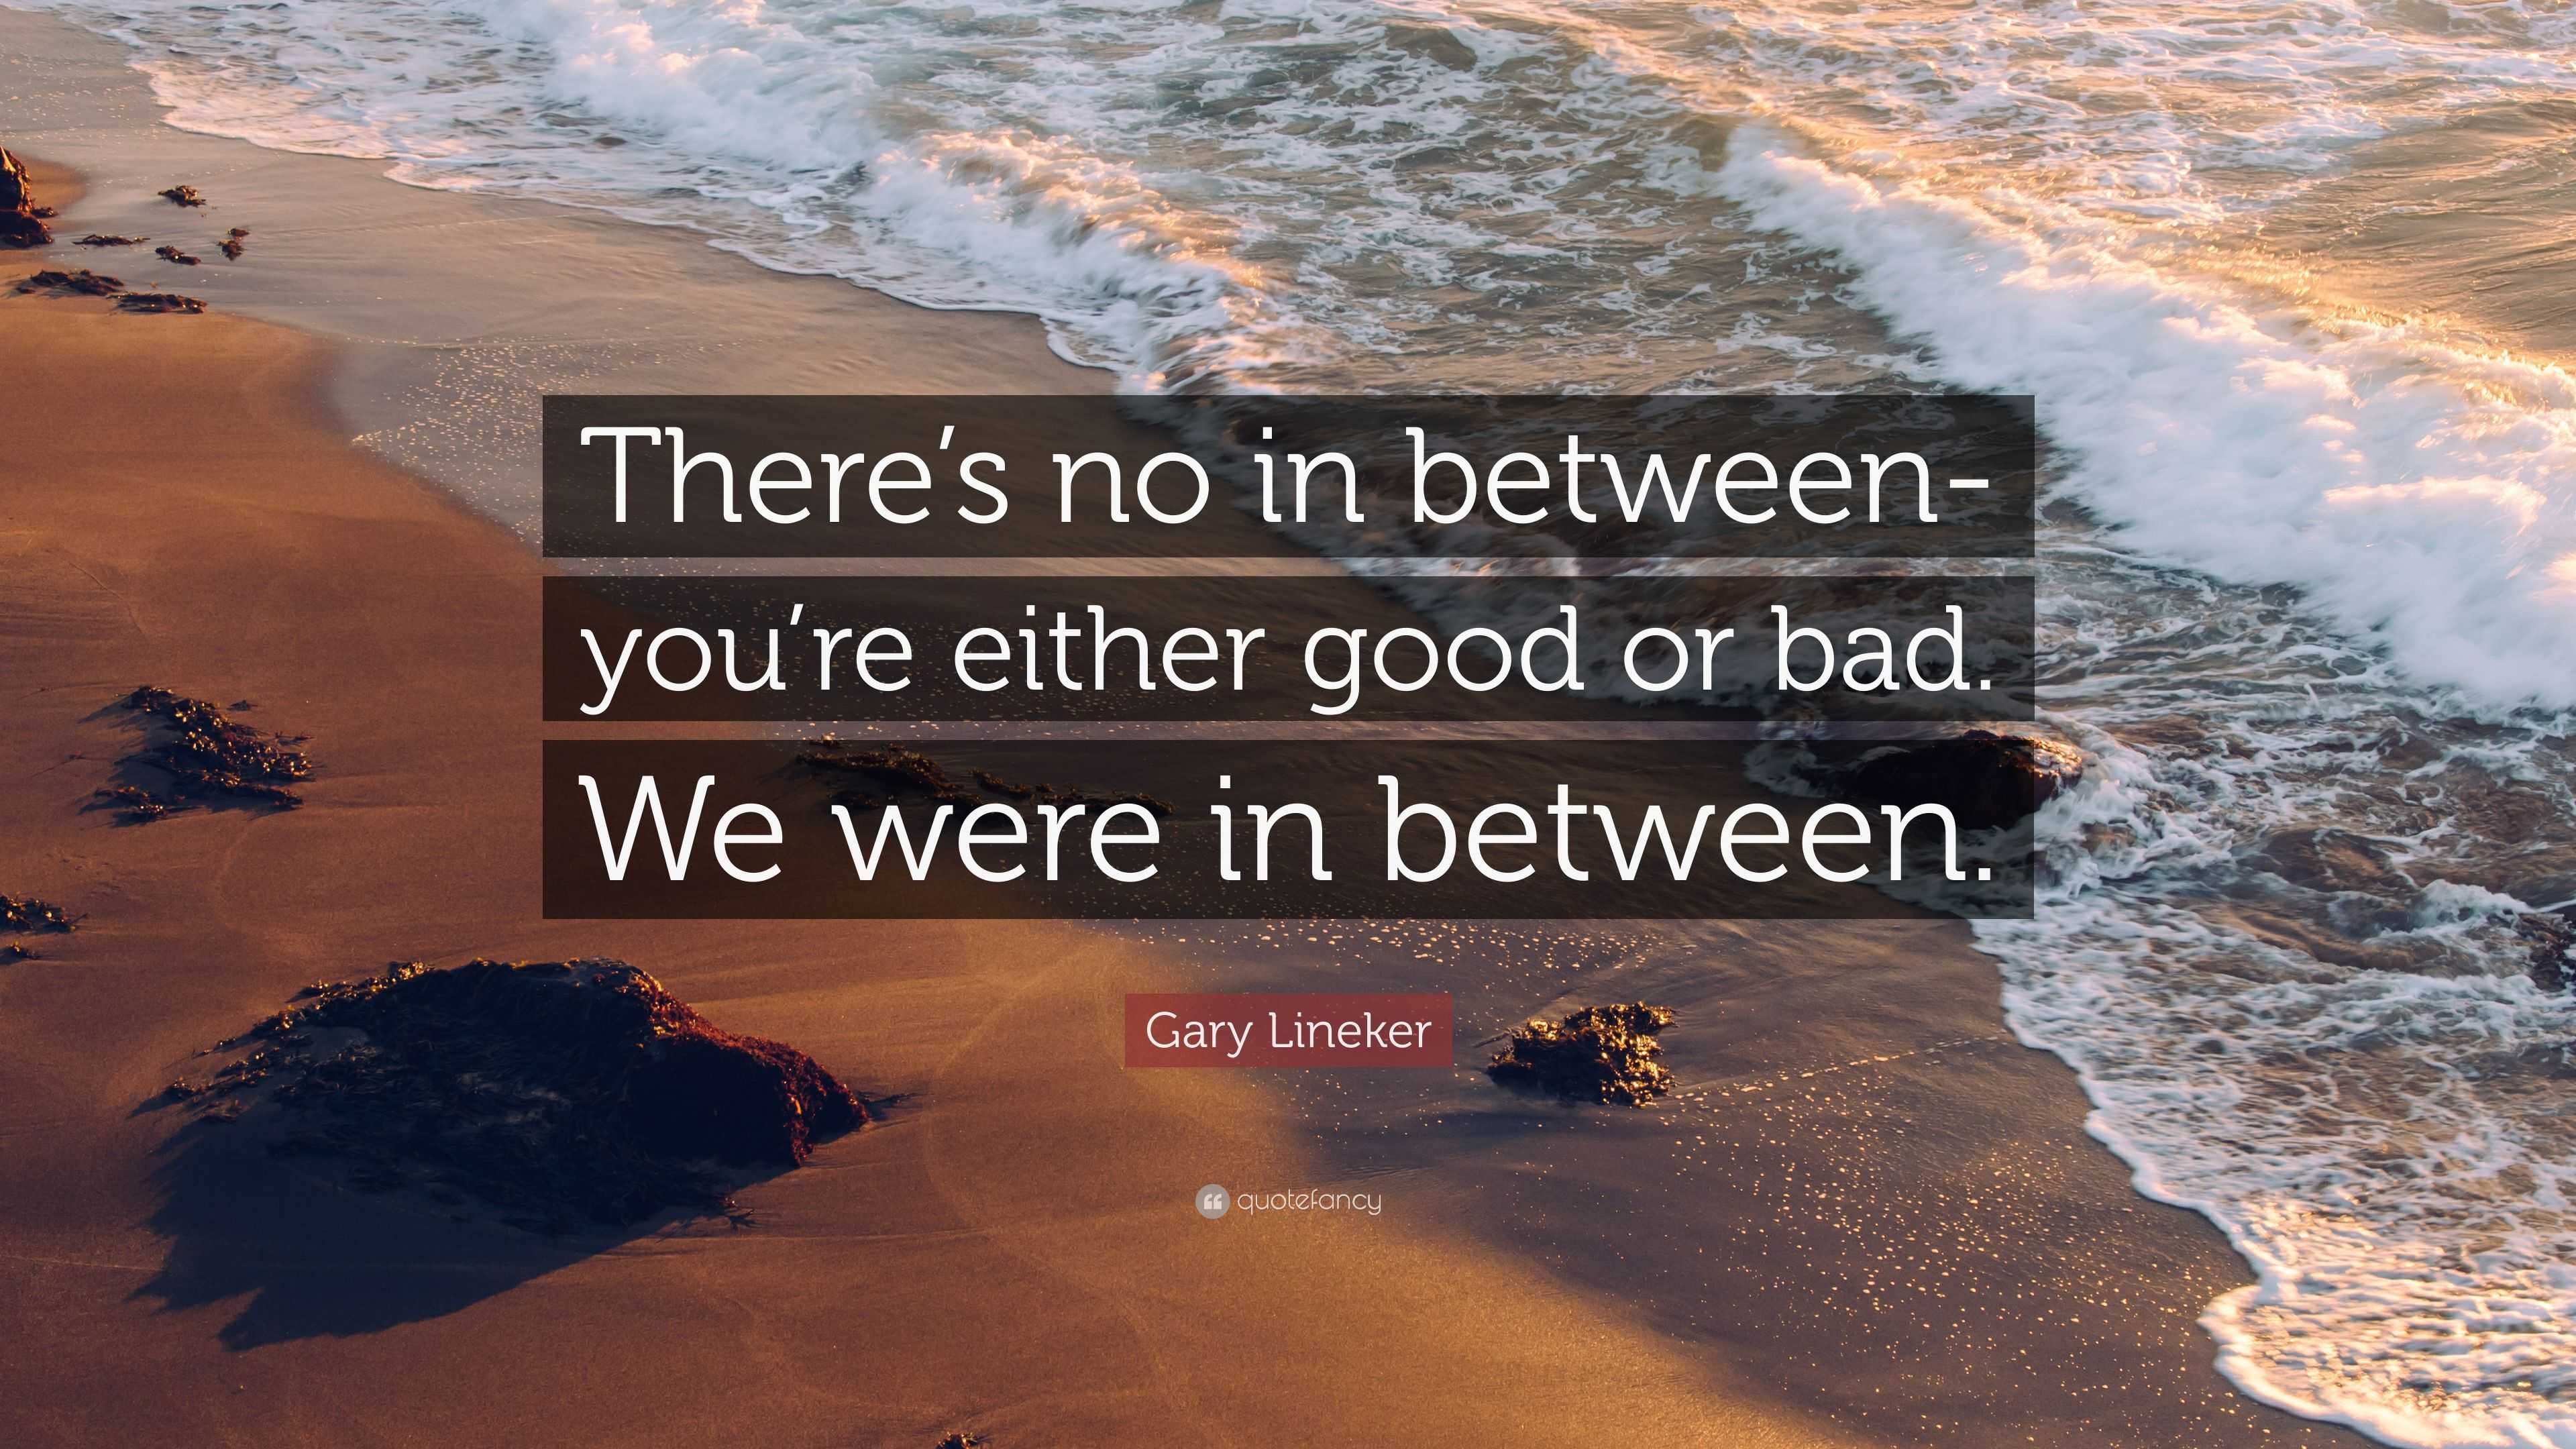 Gary Lineker Quote: “There’s no in between-you’re either good or bad ...